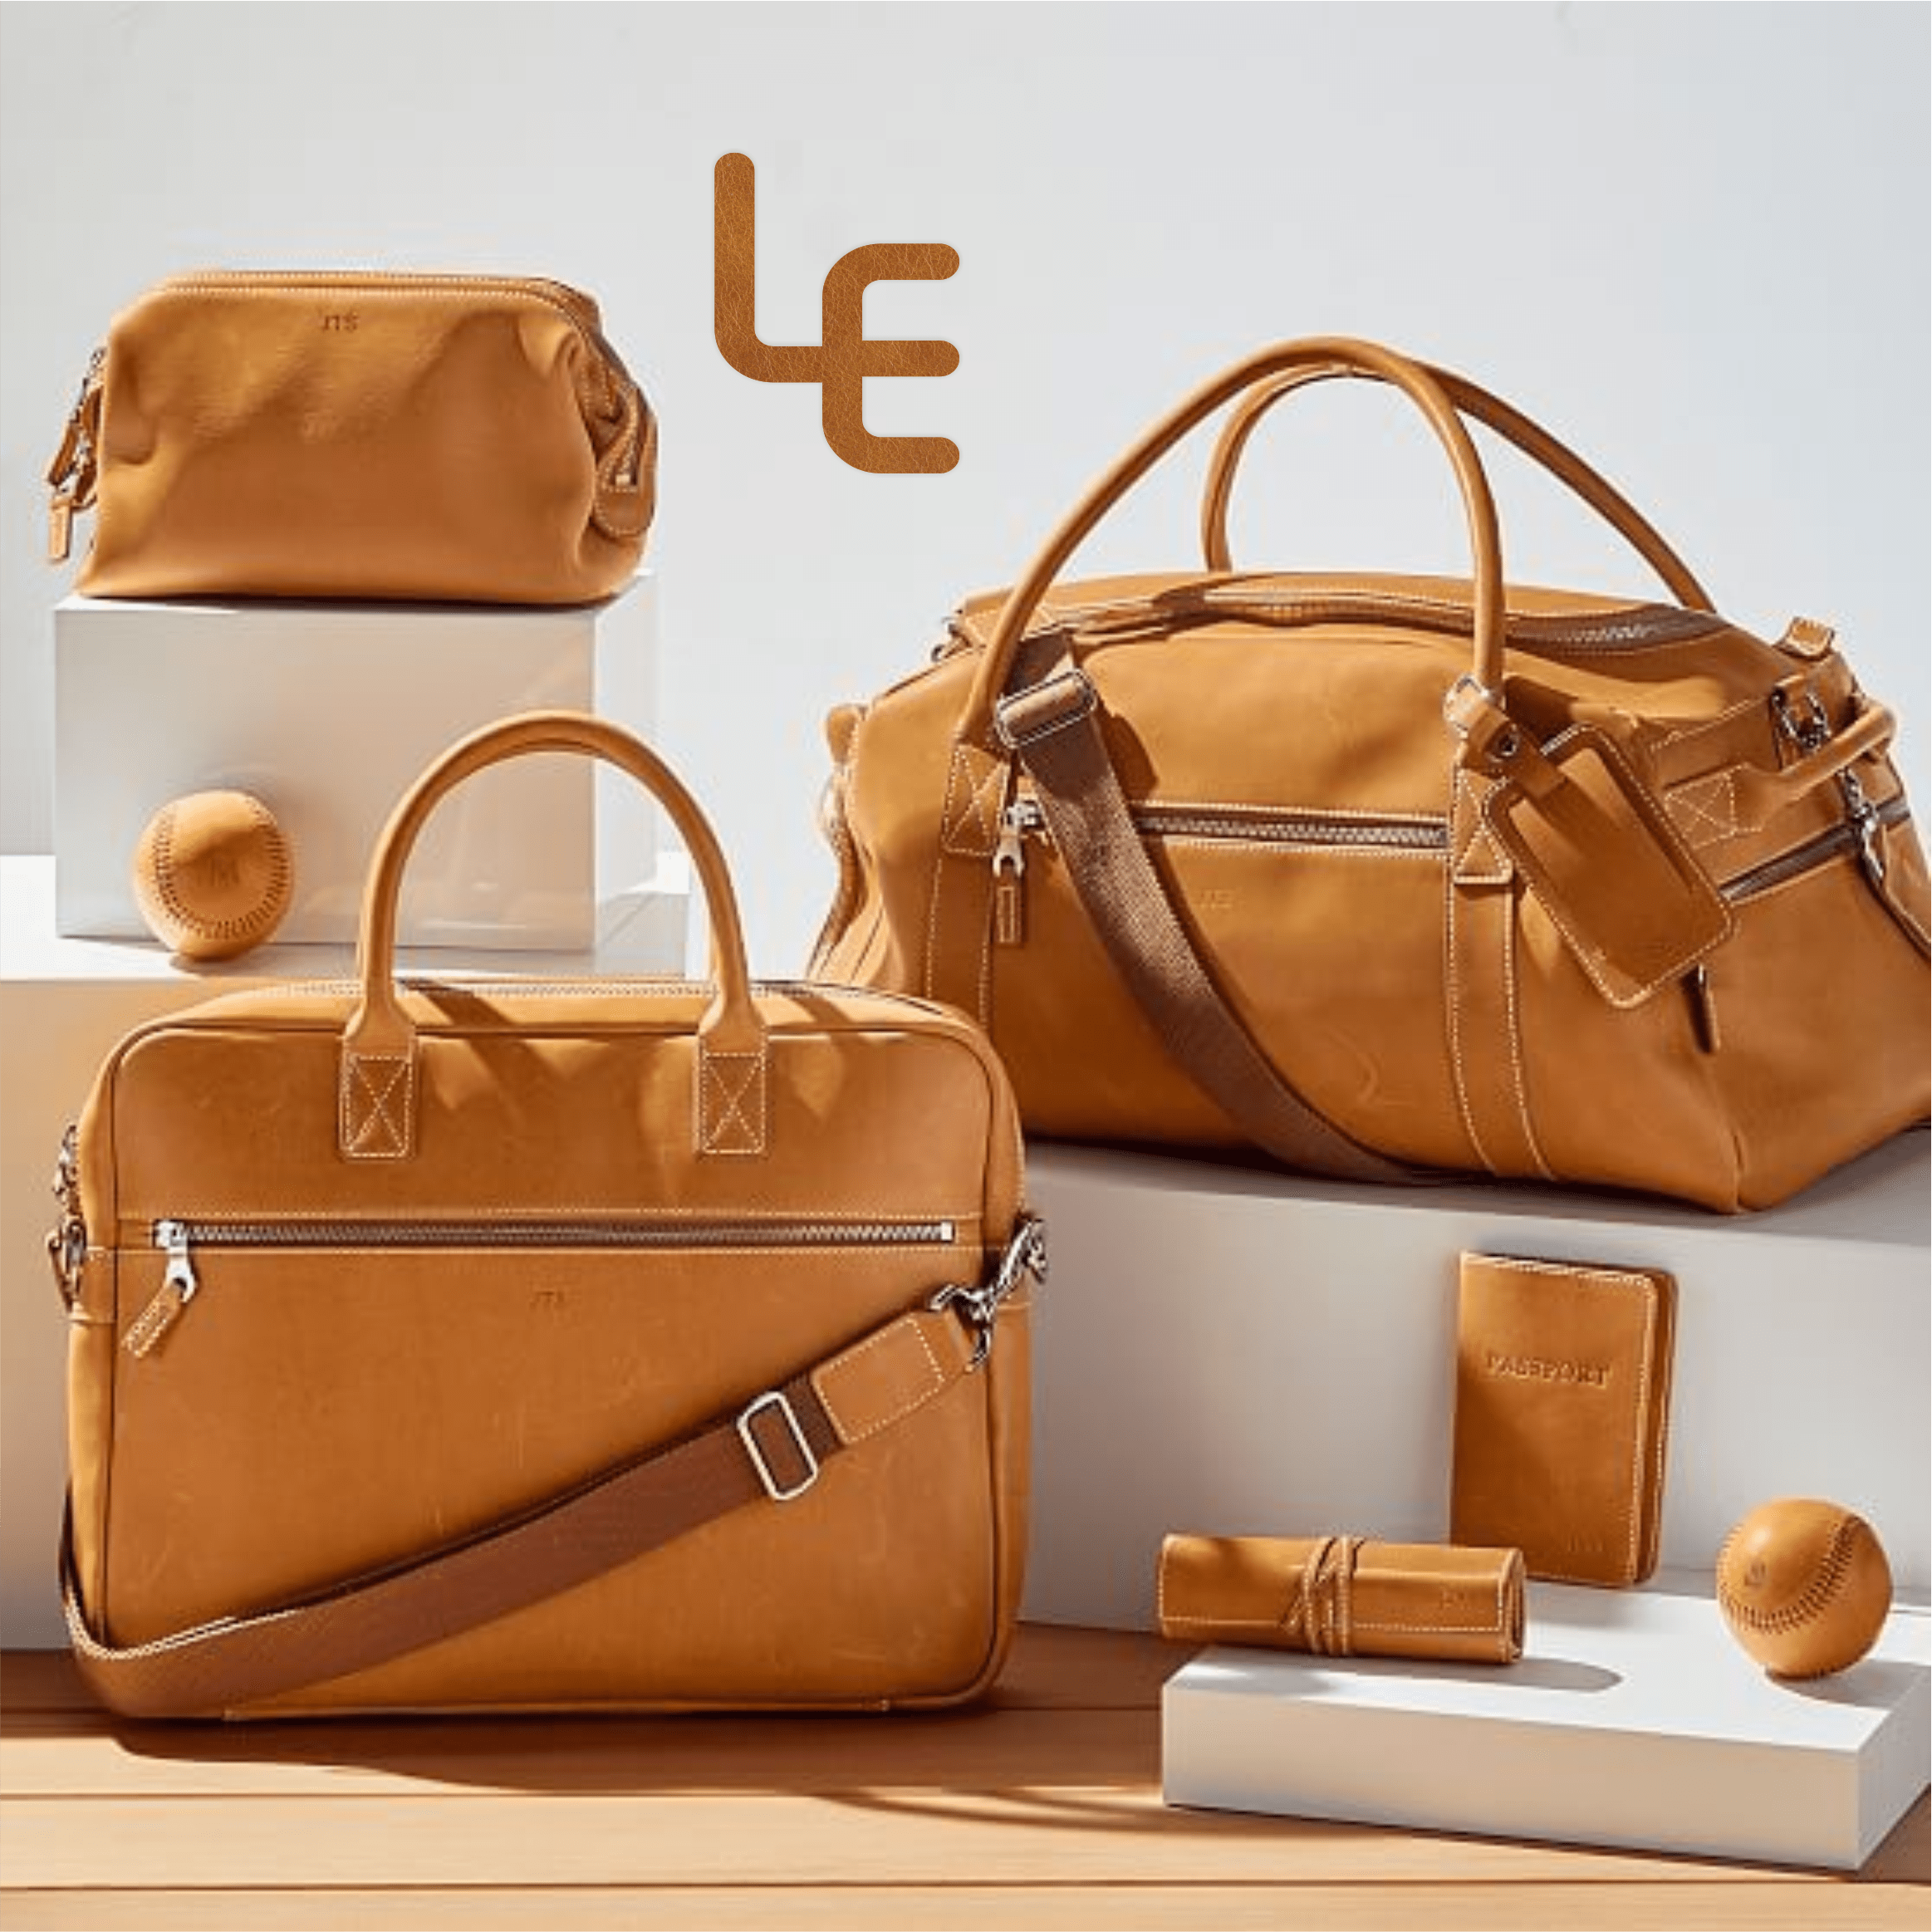 Italian handbag manufacturer - highest quality leather and vegan leather  handbags design and production, 100% made in Italy